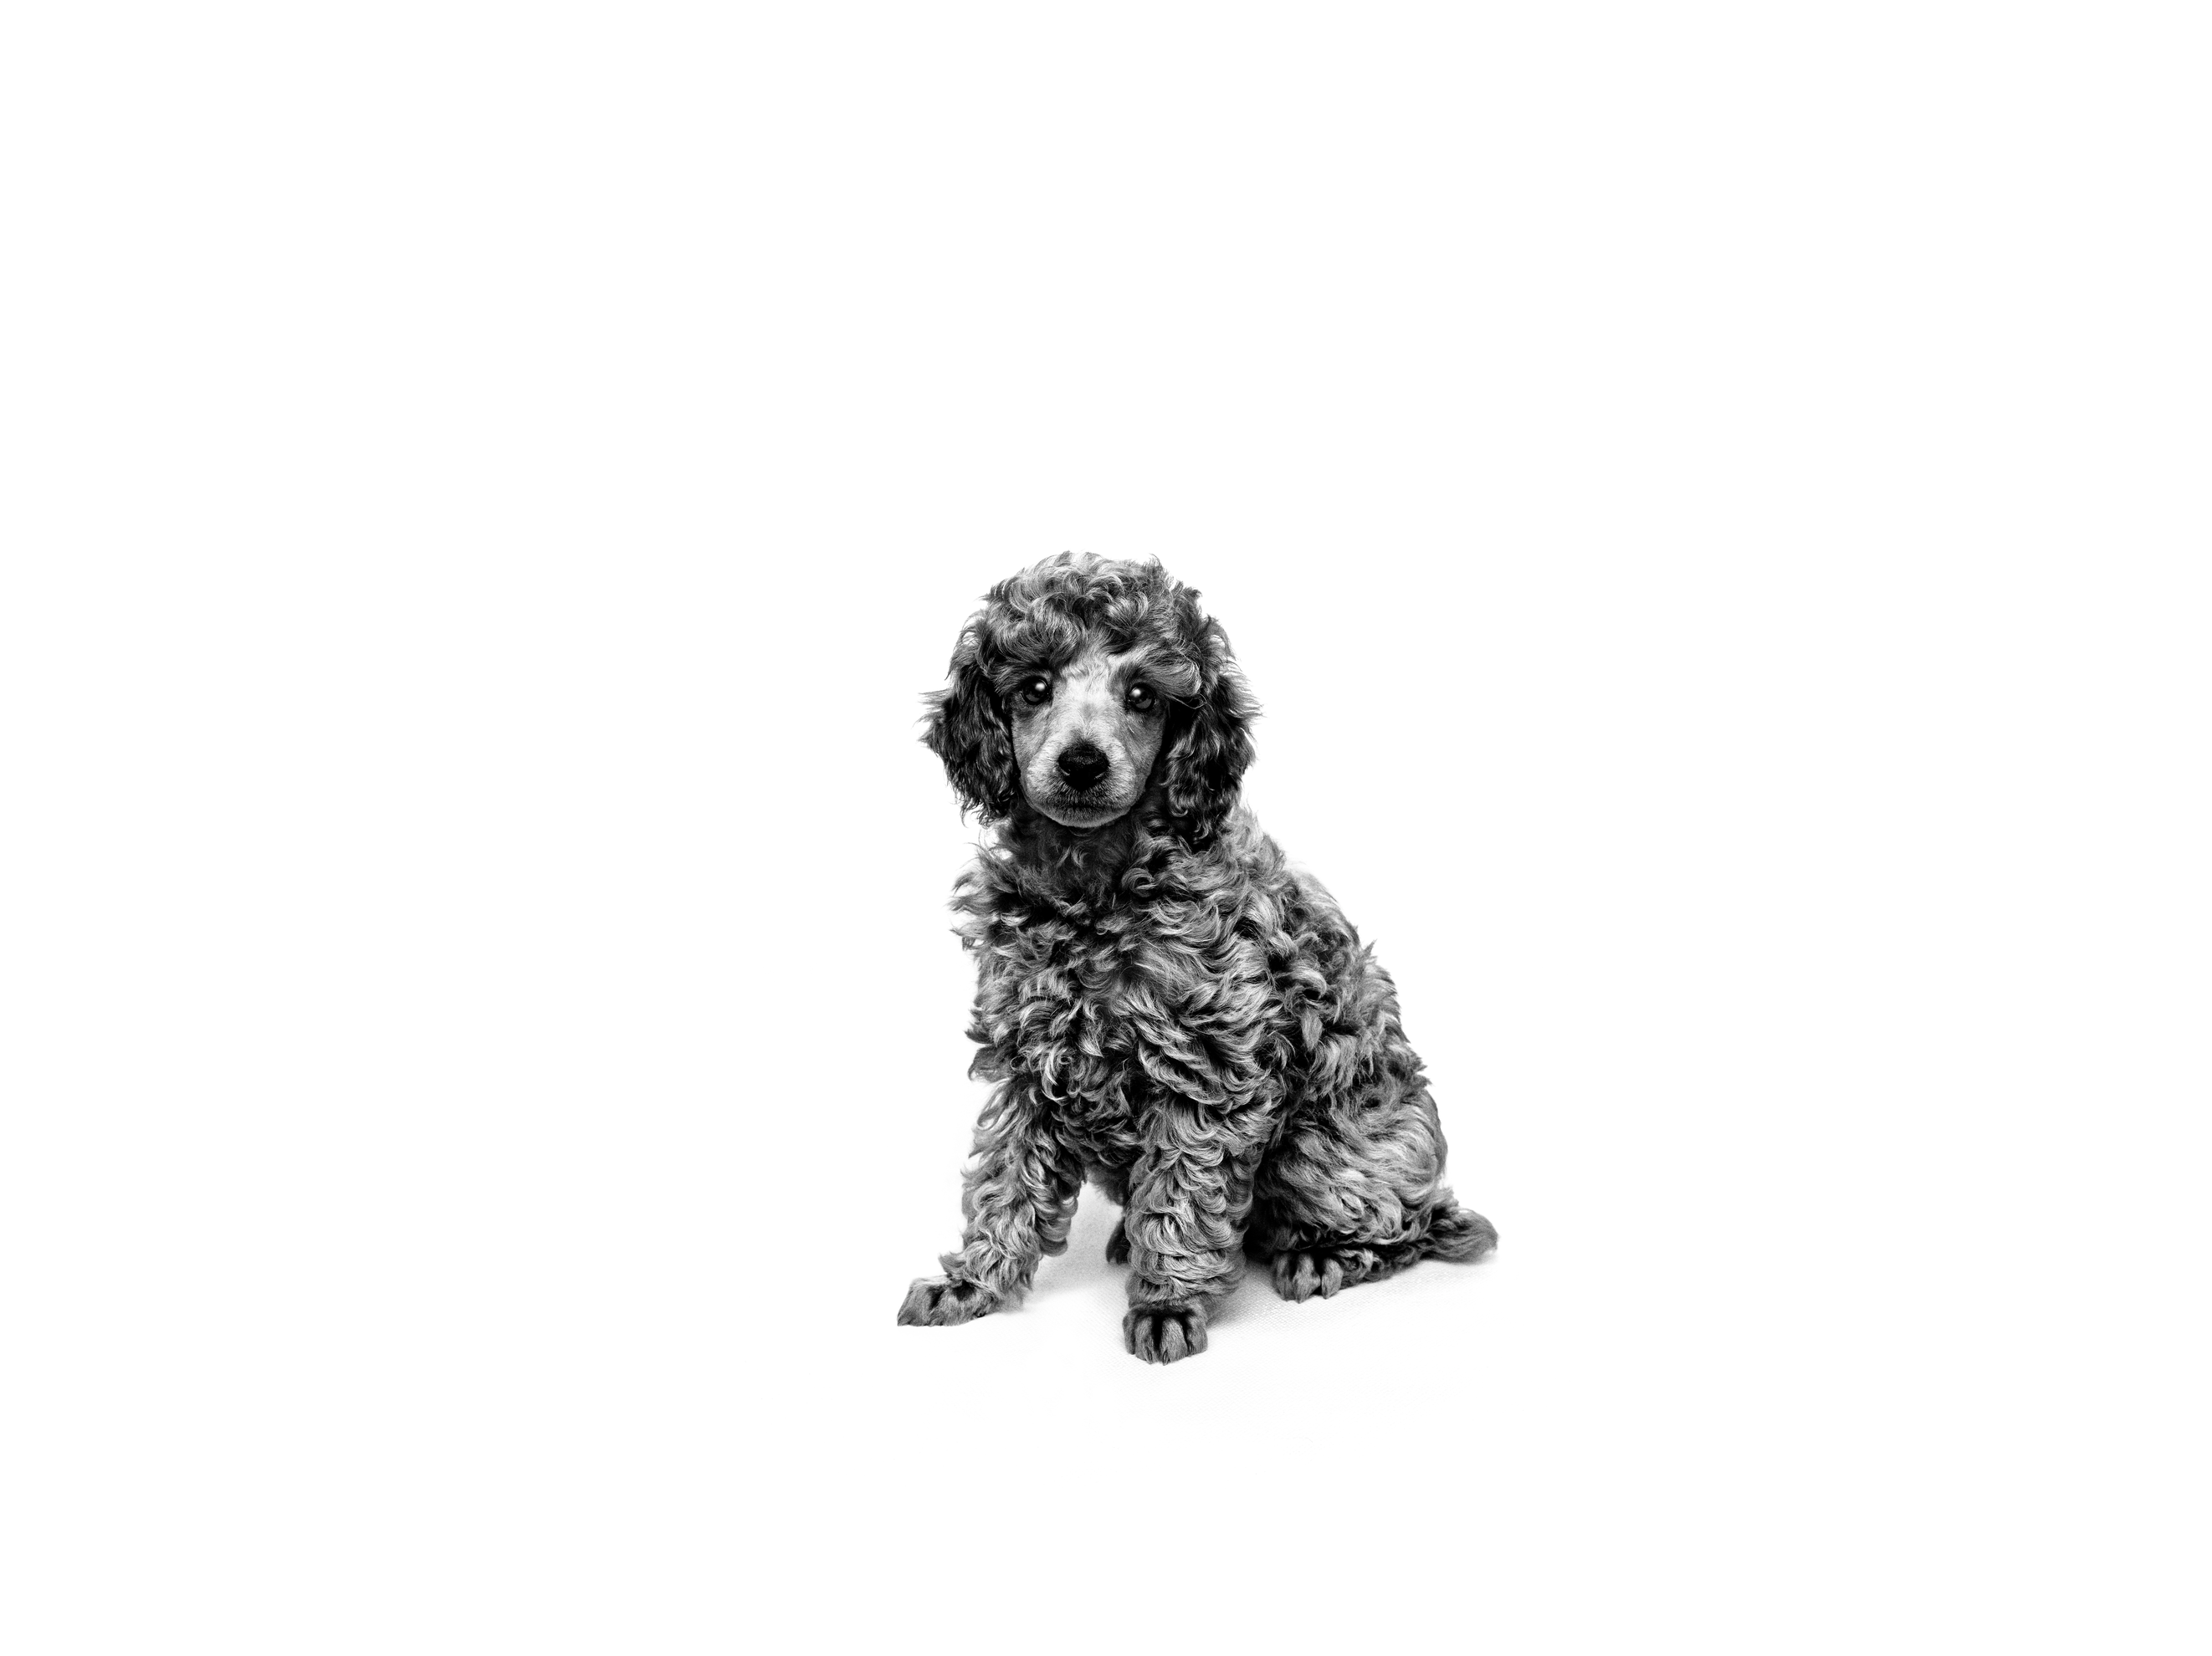 Poodle puppy sitting black and white